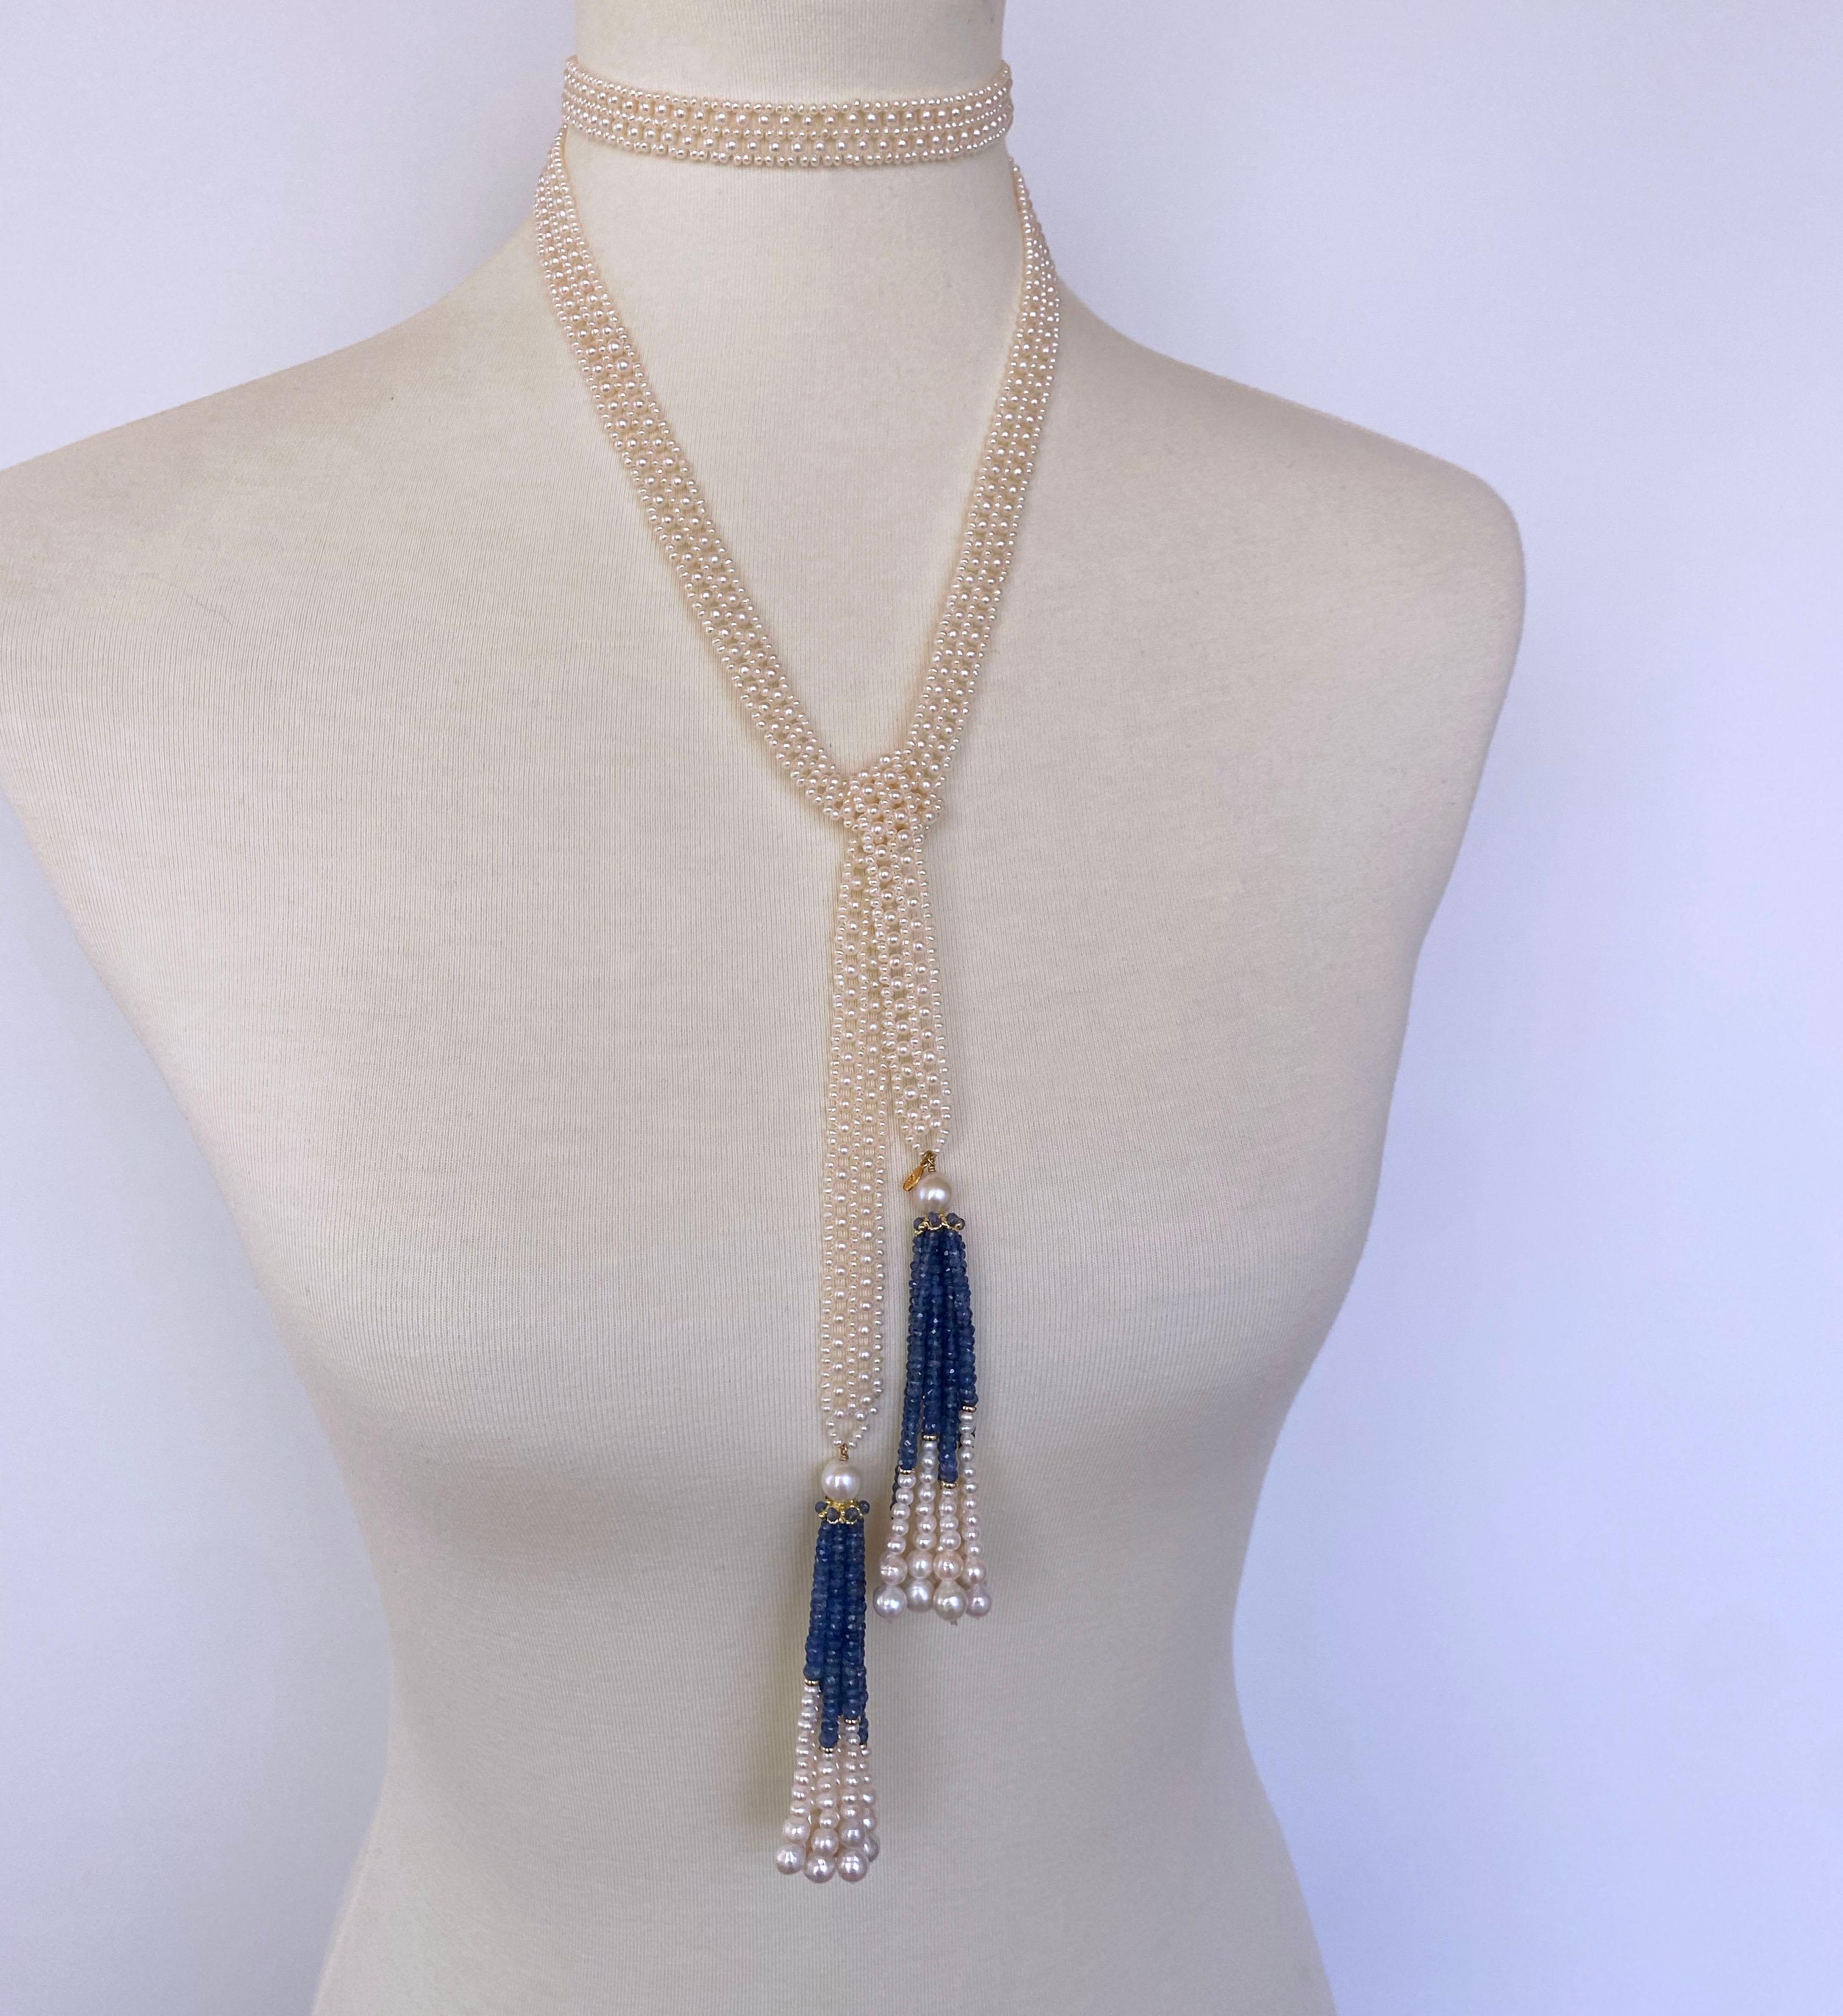 Gorgeous Sautoir all hand woven by Marina J. This amazing piece features individually chosen high luster white (1mm and 2.5mm) Pearls woven together into a fine lace like columned design. Measuring 43 inches long sans Tassel, this Sautoir can is